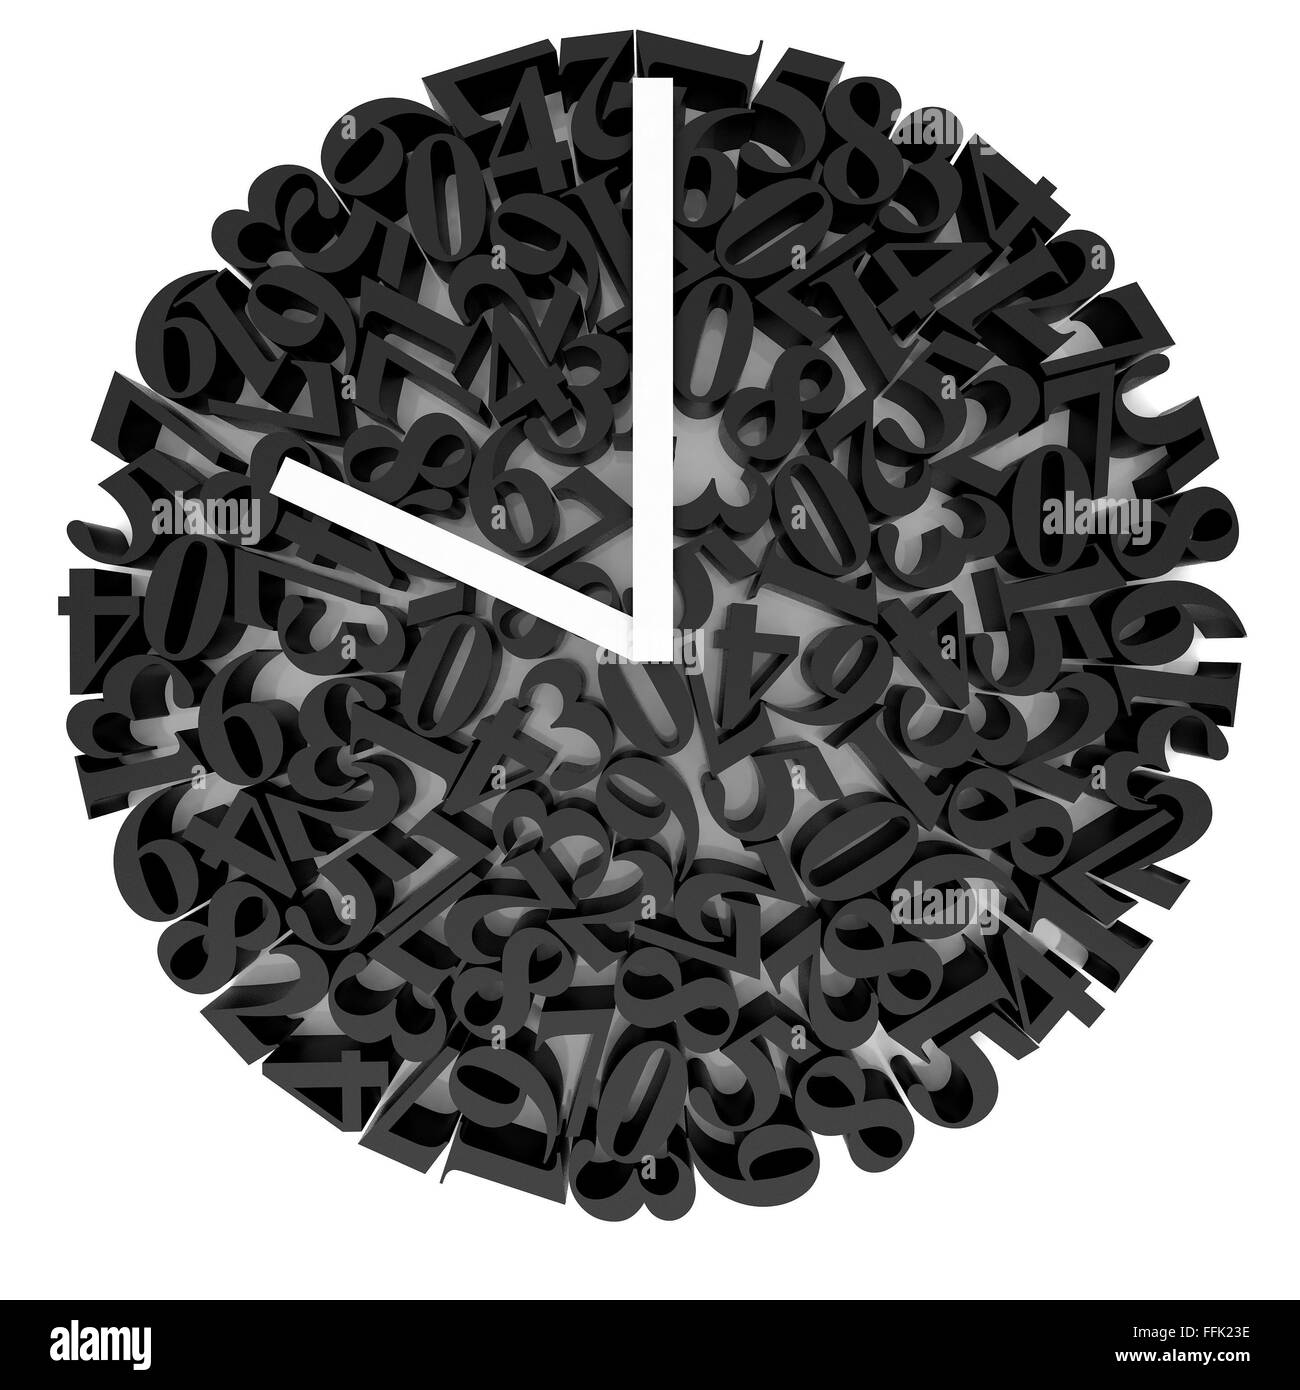 High resolution image. 3d rendered illustration. The original clock face. Stock Photo